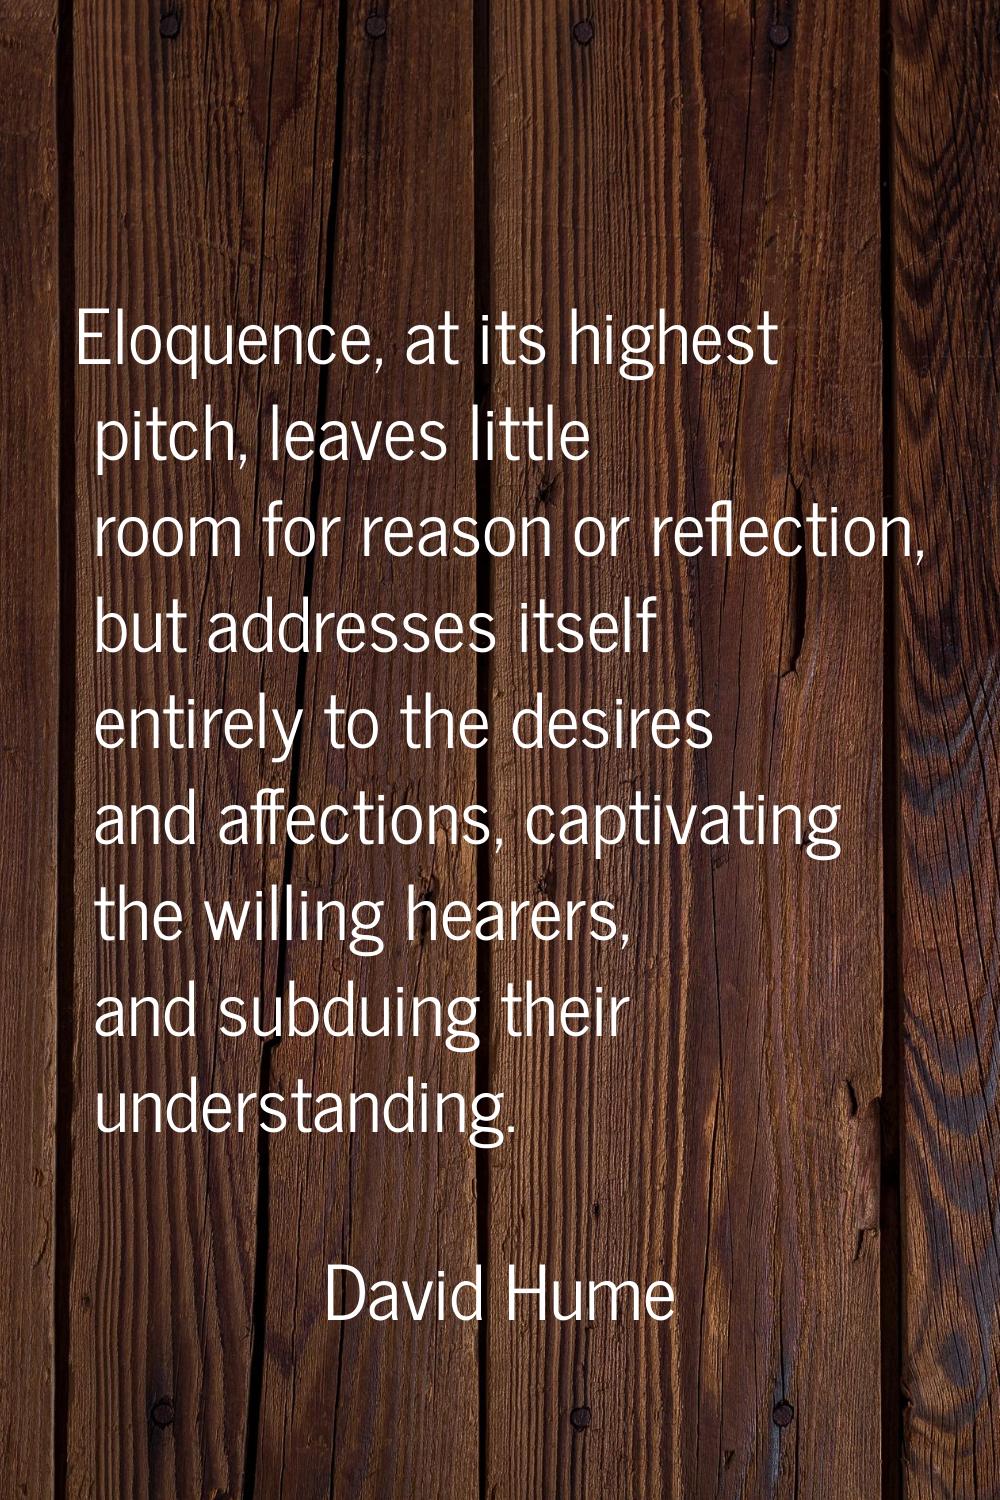 Eloquence, at its highest pitch, leaves little room for reason or reflection, but addresses itself 